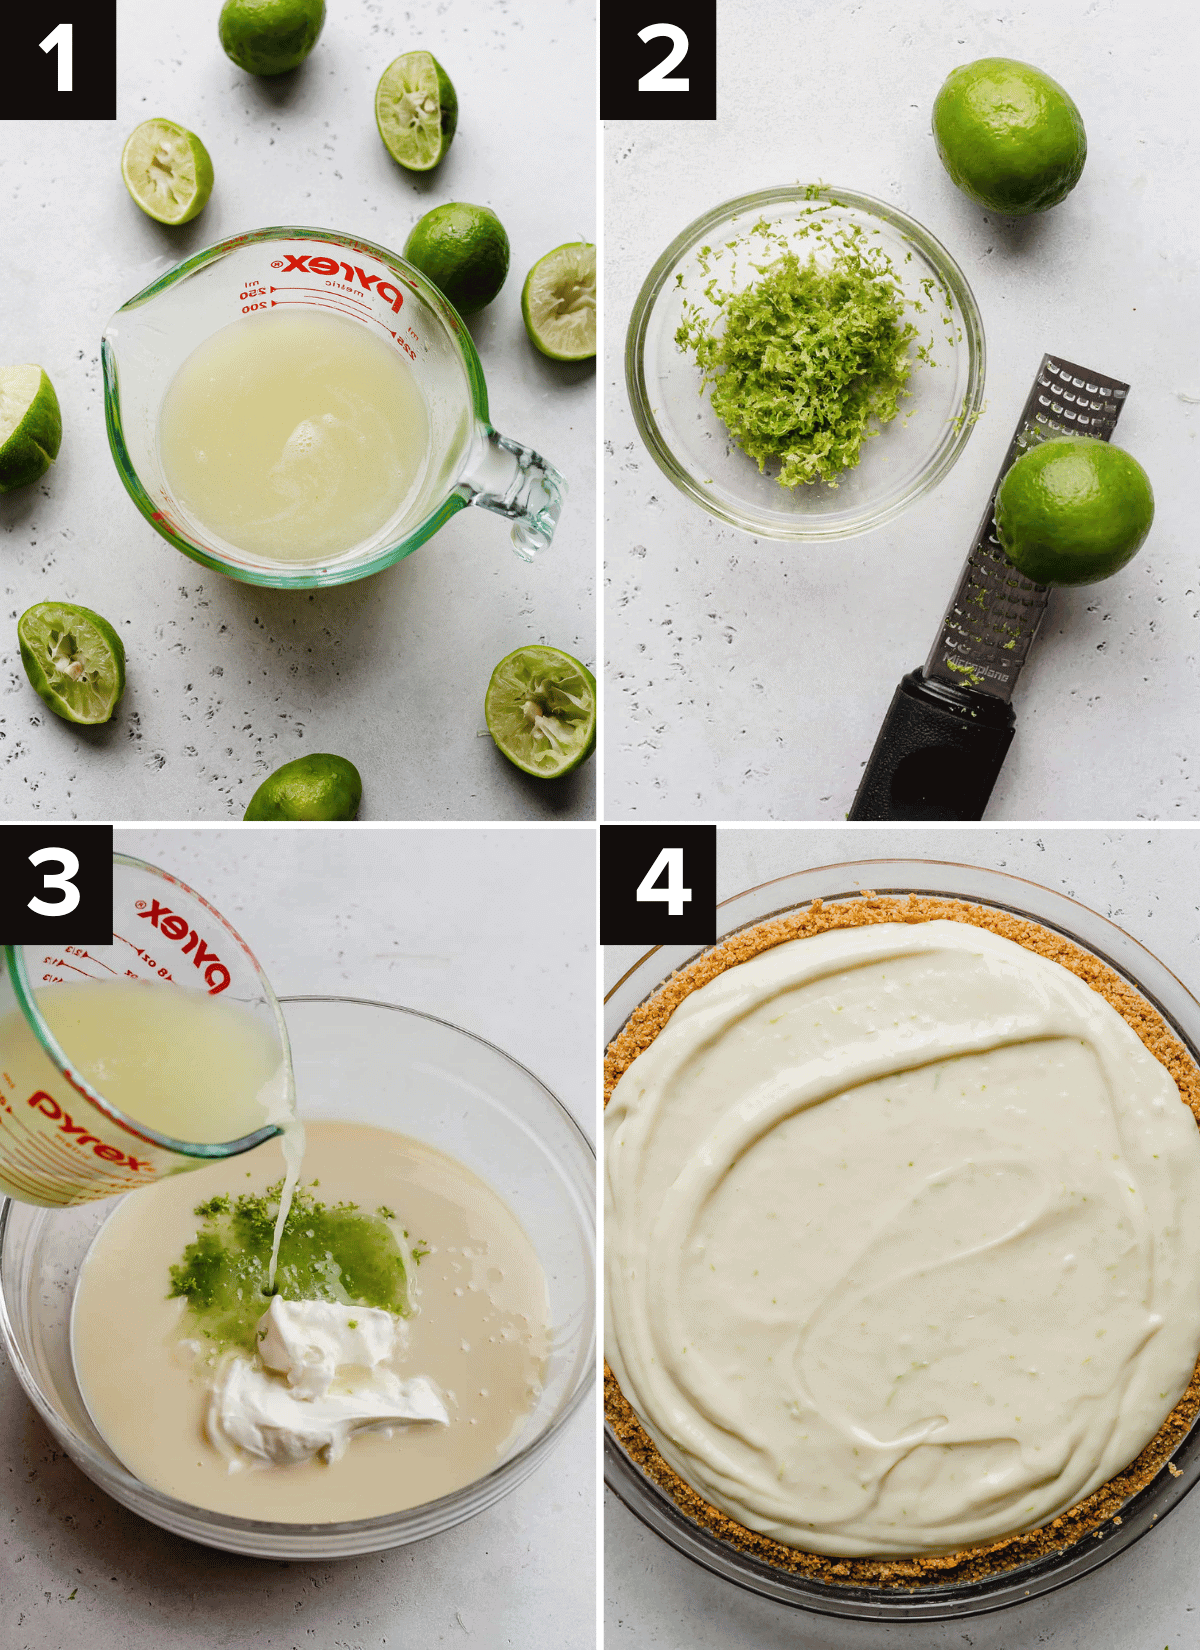 Four images showing how to make key lime pie with sour cream, using fresh key limes, sweetened condensed milk, sour cream.